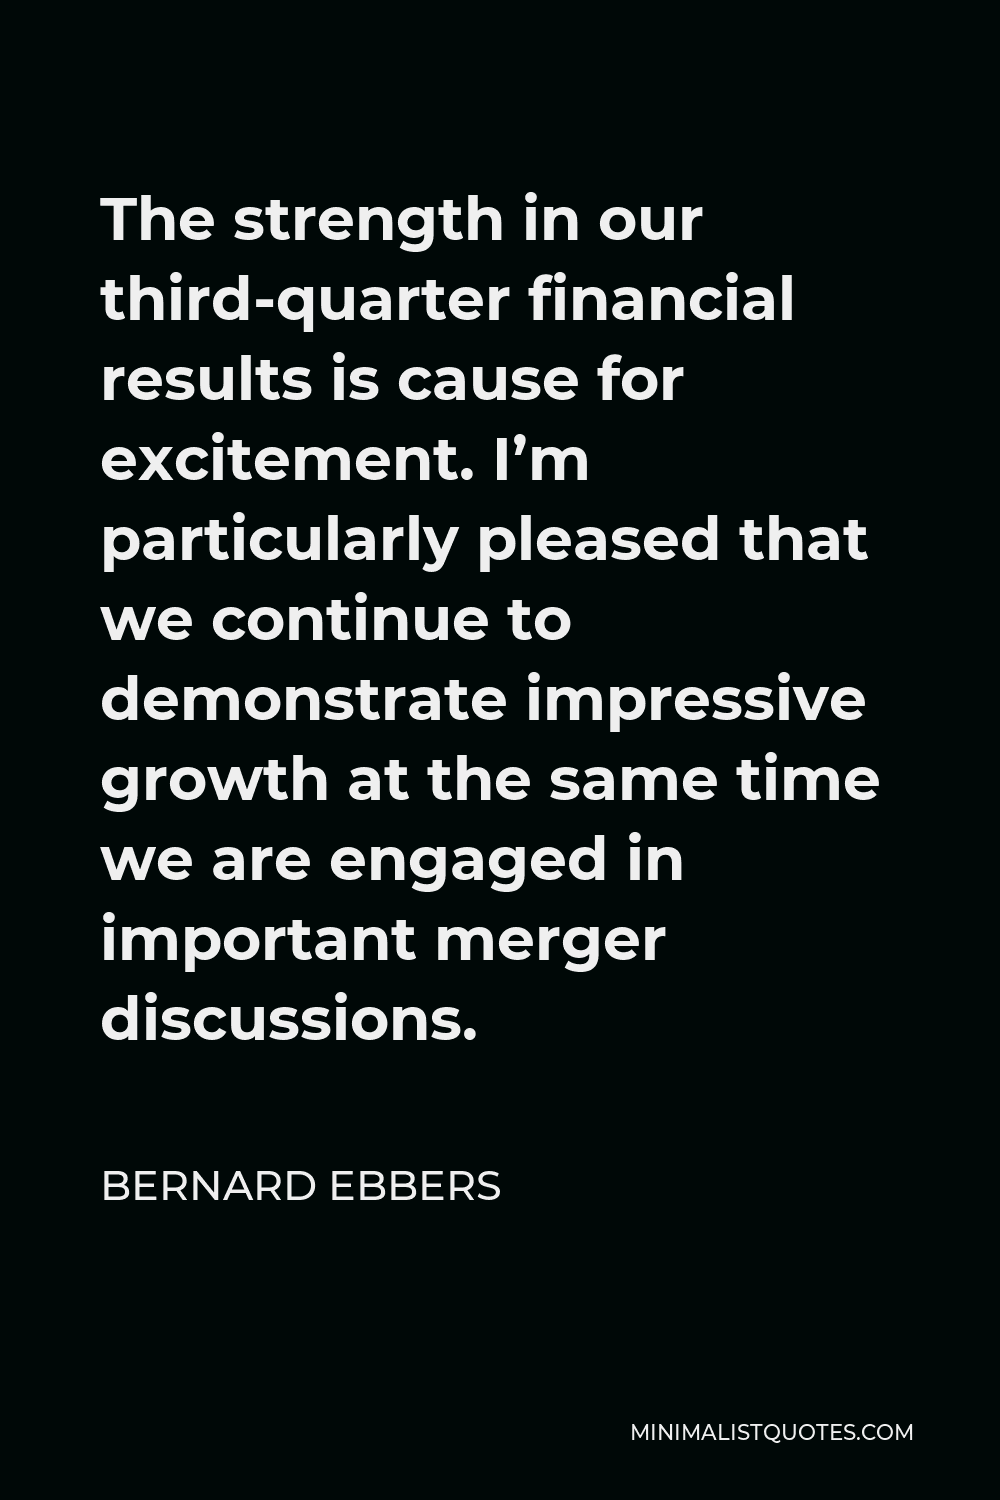 Bernard Ebbers Quote - The strength in our third-quarter financial results is cause for excitement. I’m particularly pleased that we continue to demonstrate impressive growth at the same time we are engaged in important merger discussions.